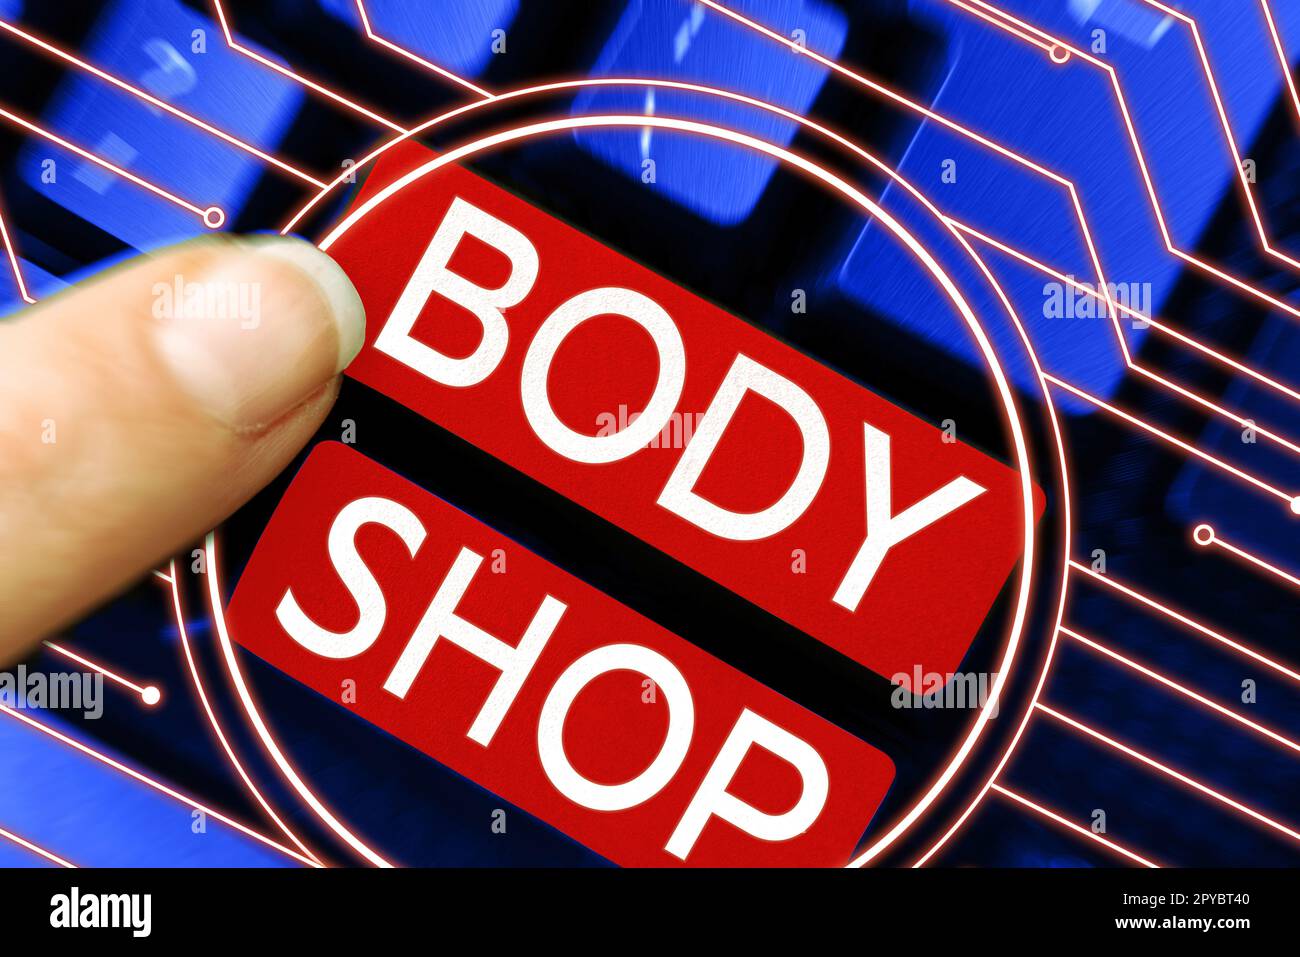 Hand writing sign Body Shop. Business approach a shop where automotive bodies are made or repaired Stock Photo